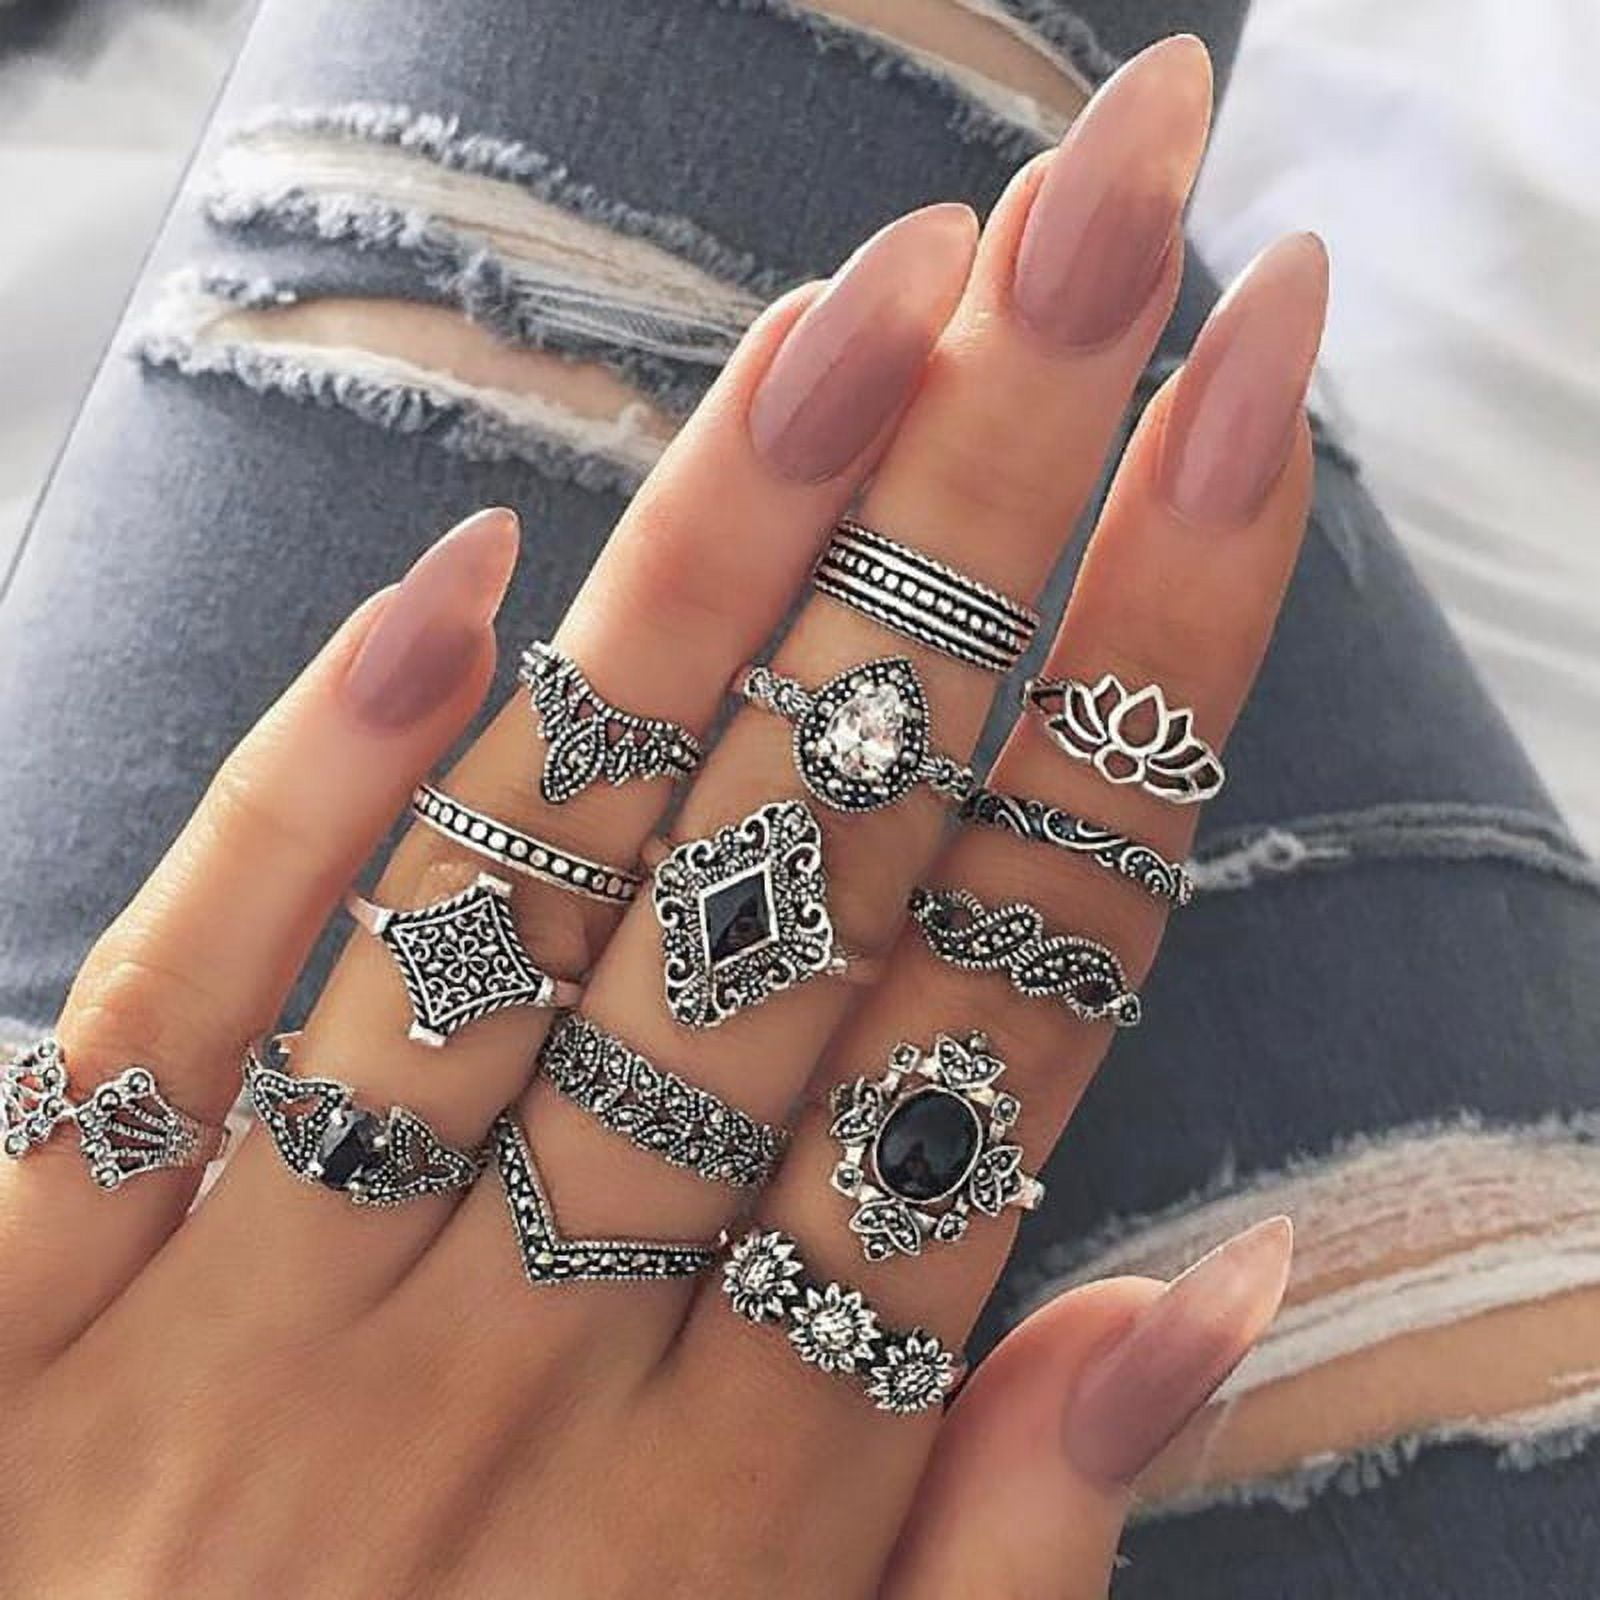 JEFFENLY 15 Pcs Vintage Knuckle Ring Set for Women Girls Stackable Rings  Set Hollow Carved Flowers